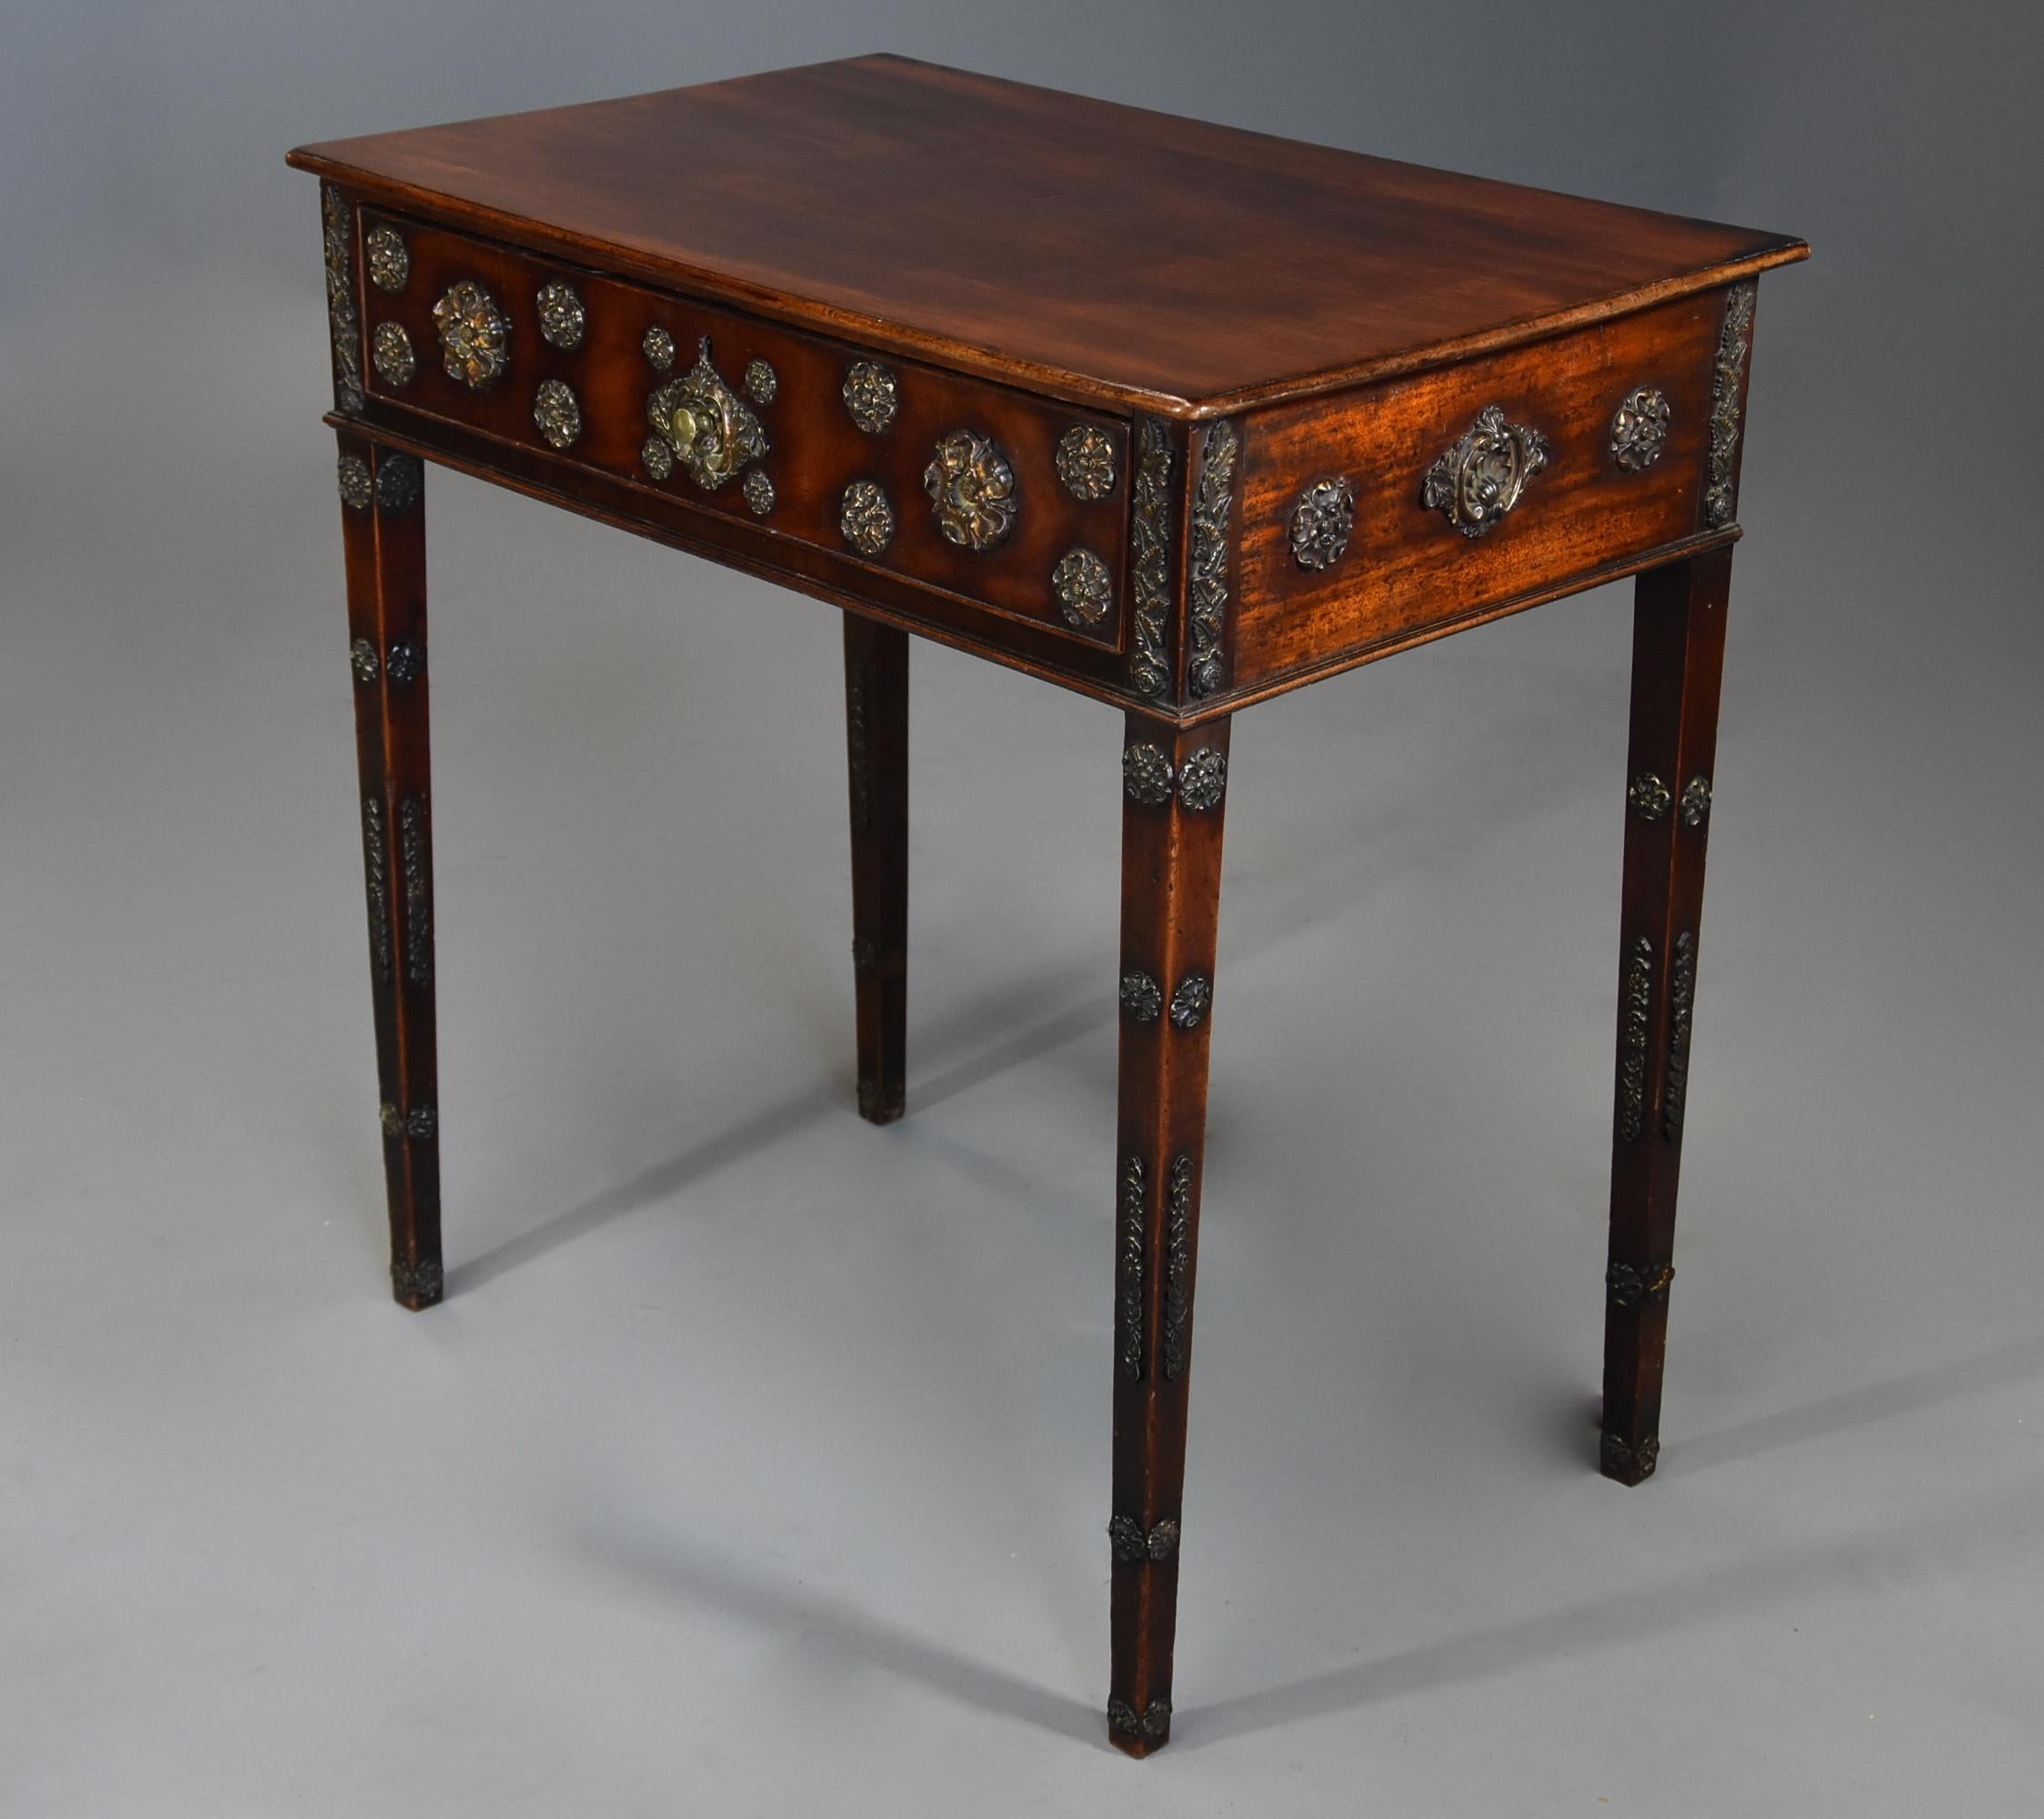 Decorative Late 18th Century Mahogany Side Table with Later Applied Brass Mounts 2